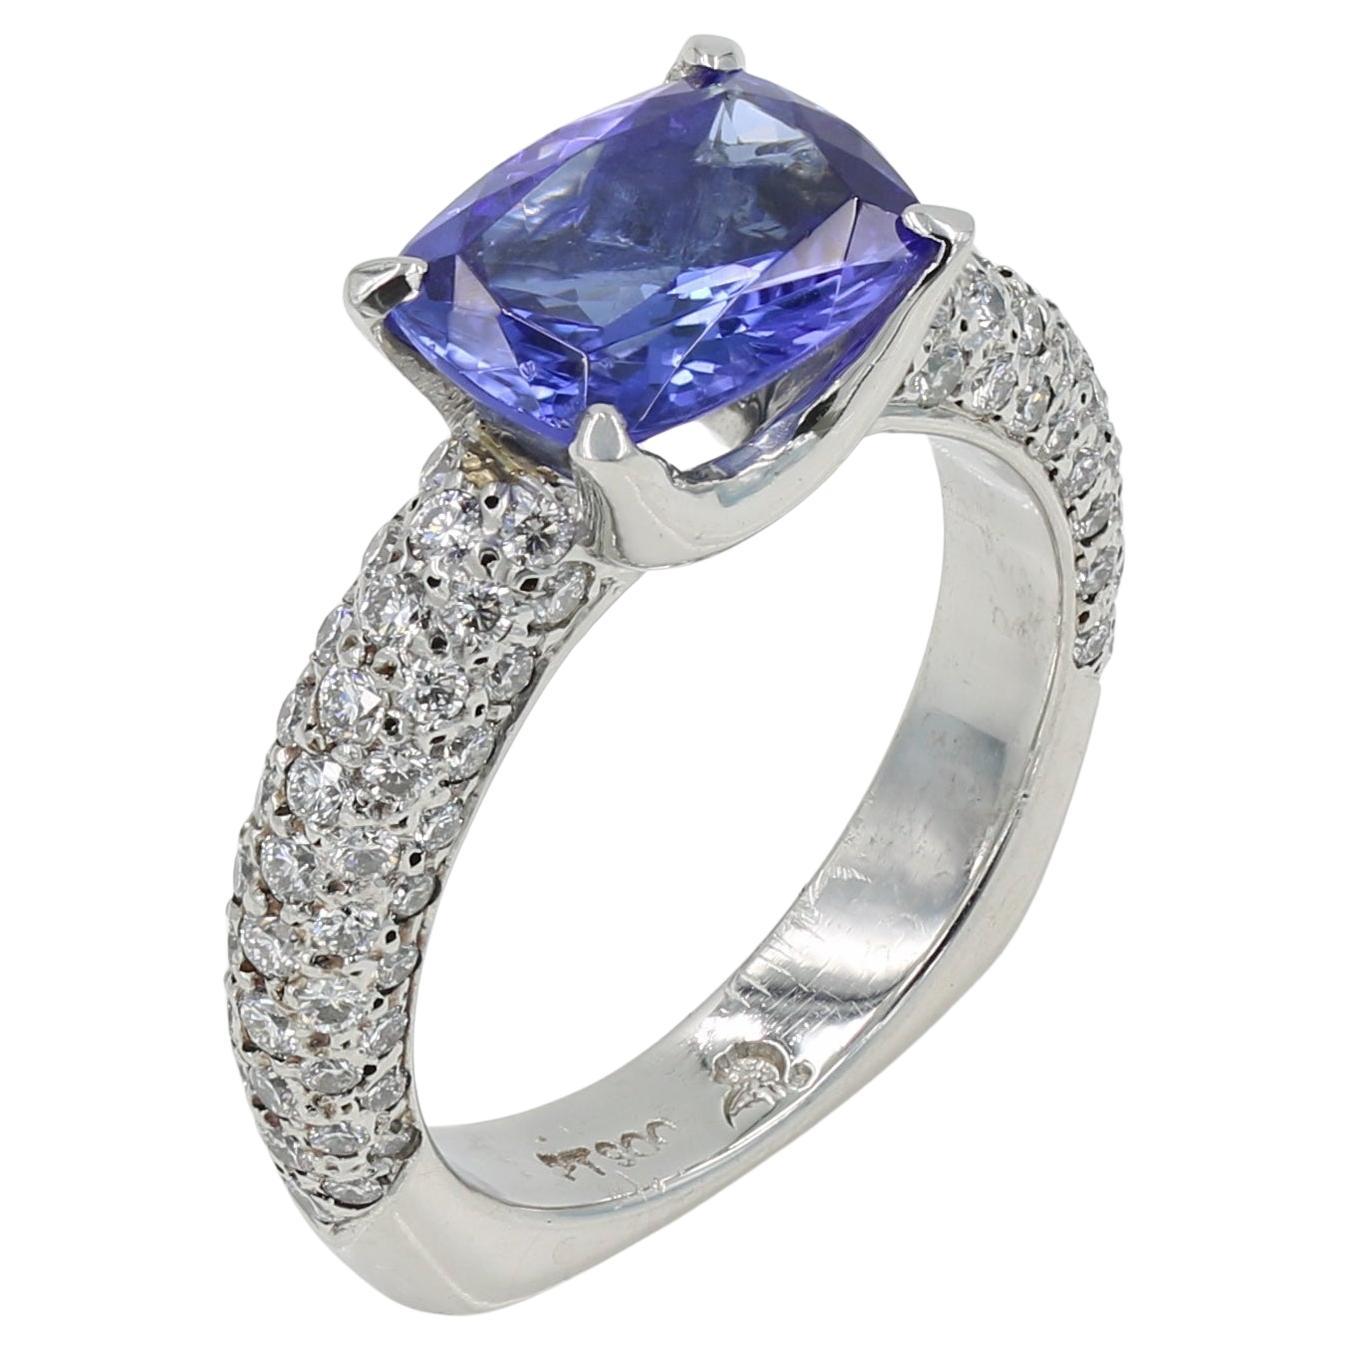 2.49cts Cushion Cut Tanzanite and Natural Diamond Ring in Platinum For Sale